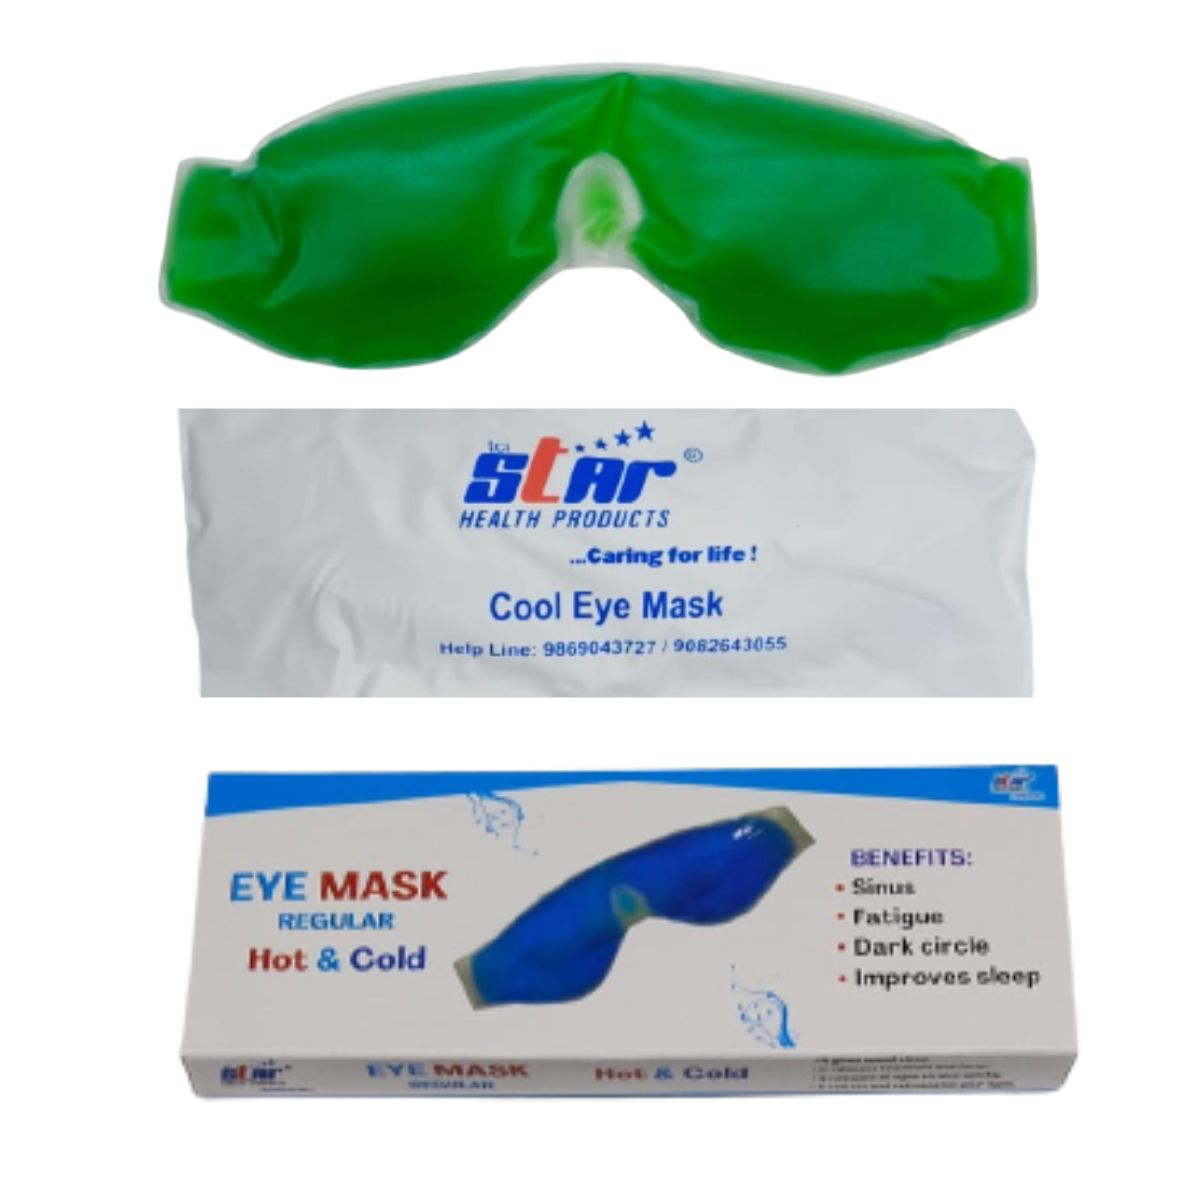 Chill out (literally) with our cooling gel eye mask.